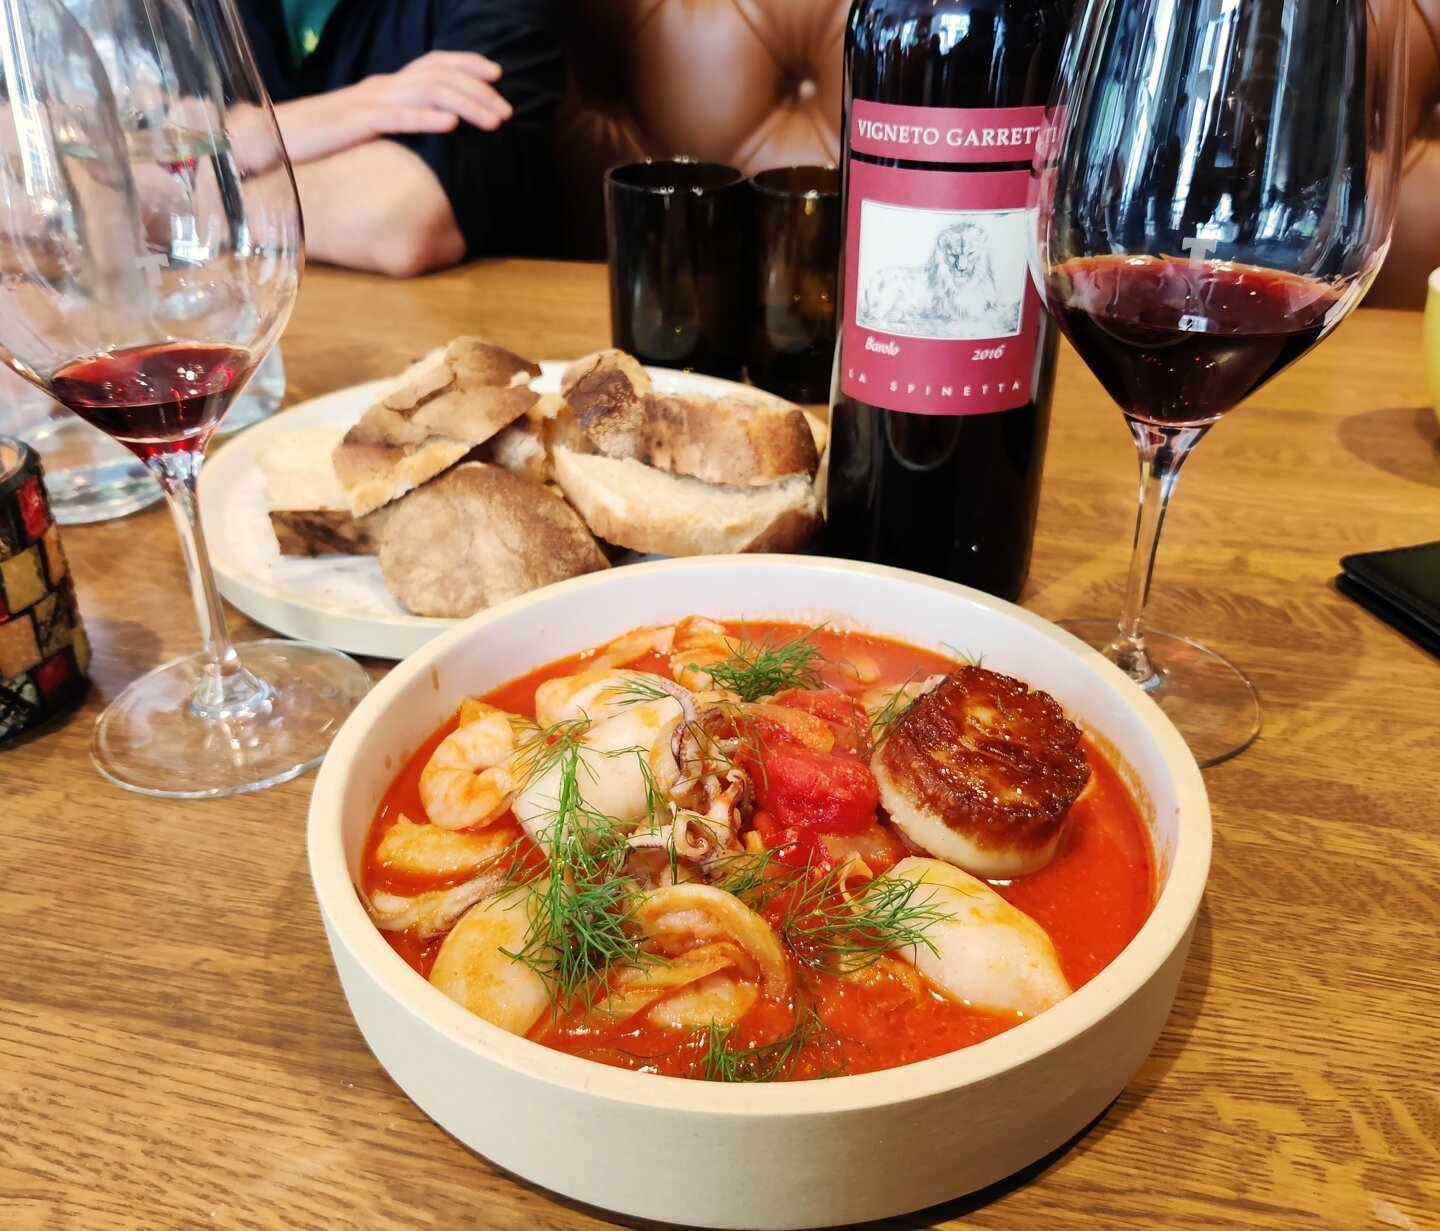 This is what working for Talia looks like 😍
Today's pre shift: a bottle of @la_spinetta 2016 Borolo along side an amazing Acqua Pazza prepared by the wonderful @chefphilreyna. 
Calamari, scallop, shrimp, san marzano, garlic, clam broth and fennel jo